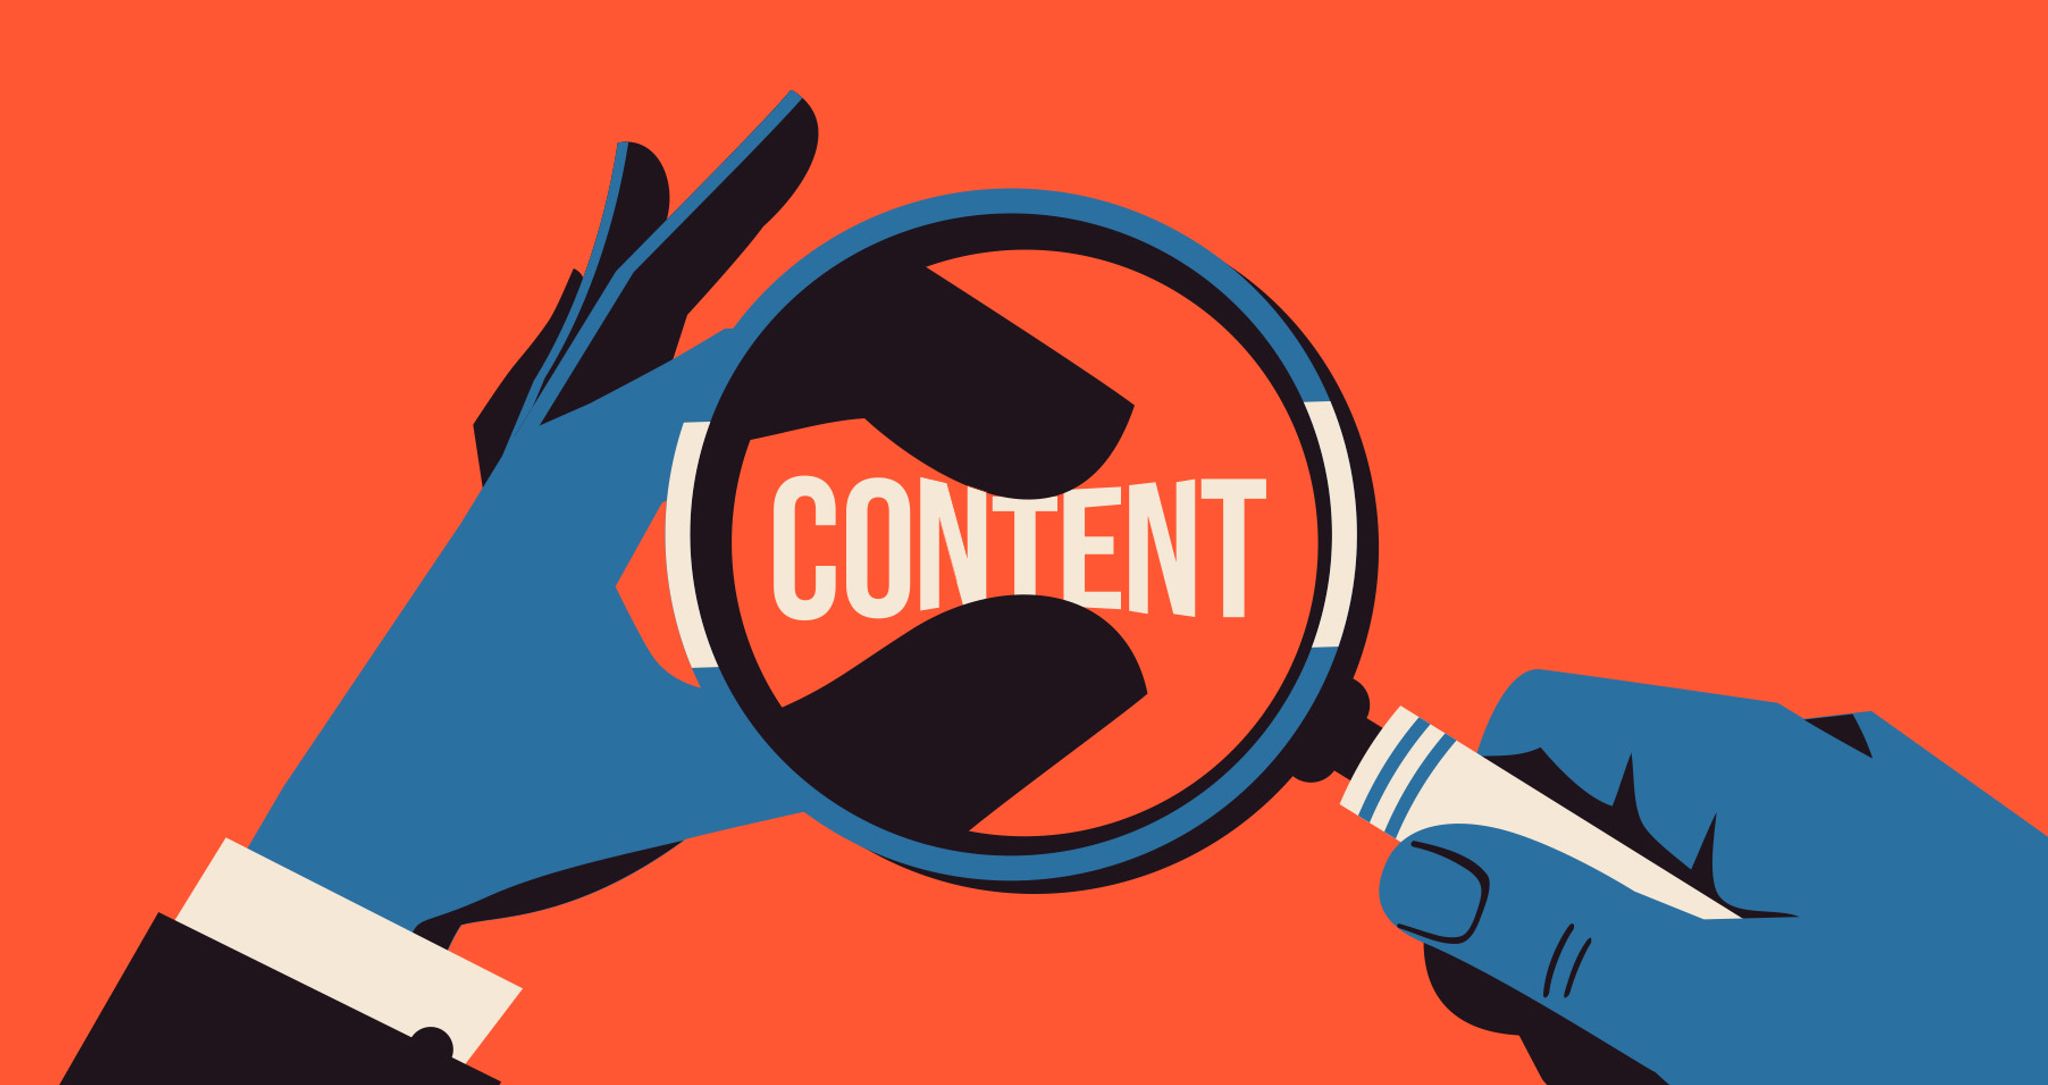 Graphic illustration of two hands up close, one holding a magnifying glass while the other is under the glass, with two fingers squeezing the word "CONTENT" in the center.